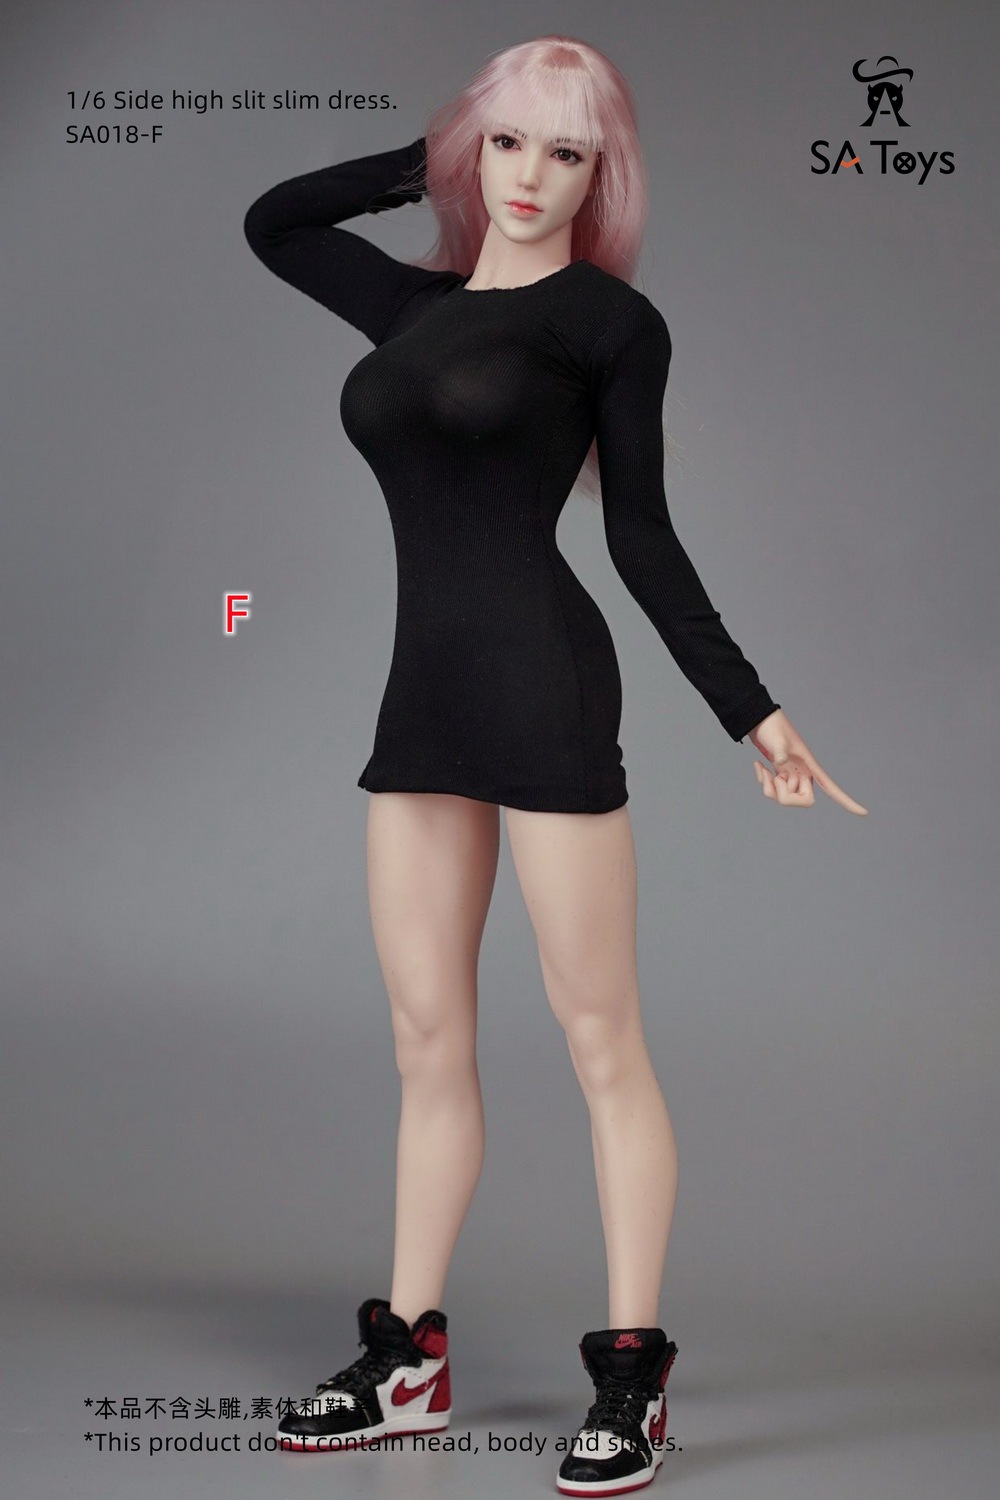 sidezipperskirt - NEW PRODUCT: SA Toys: 1/6 Personalized Poster Style Tight Dress/ Hollow T-shirt Pleated Skirt/Side Zipper Tight Skirt [Various styles available]  16572010